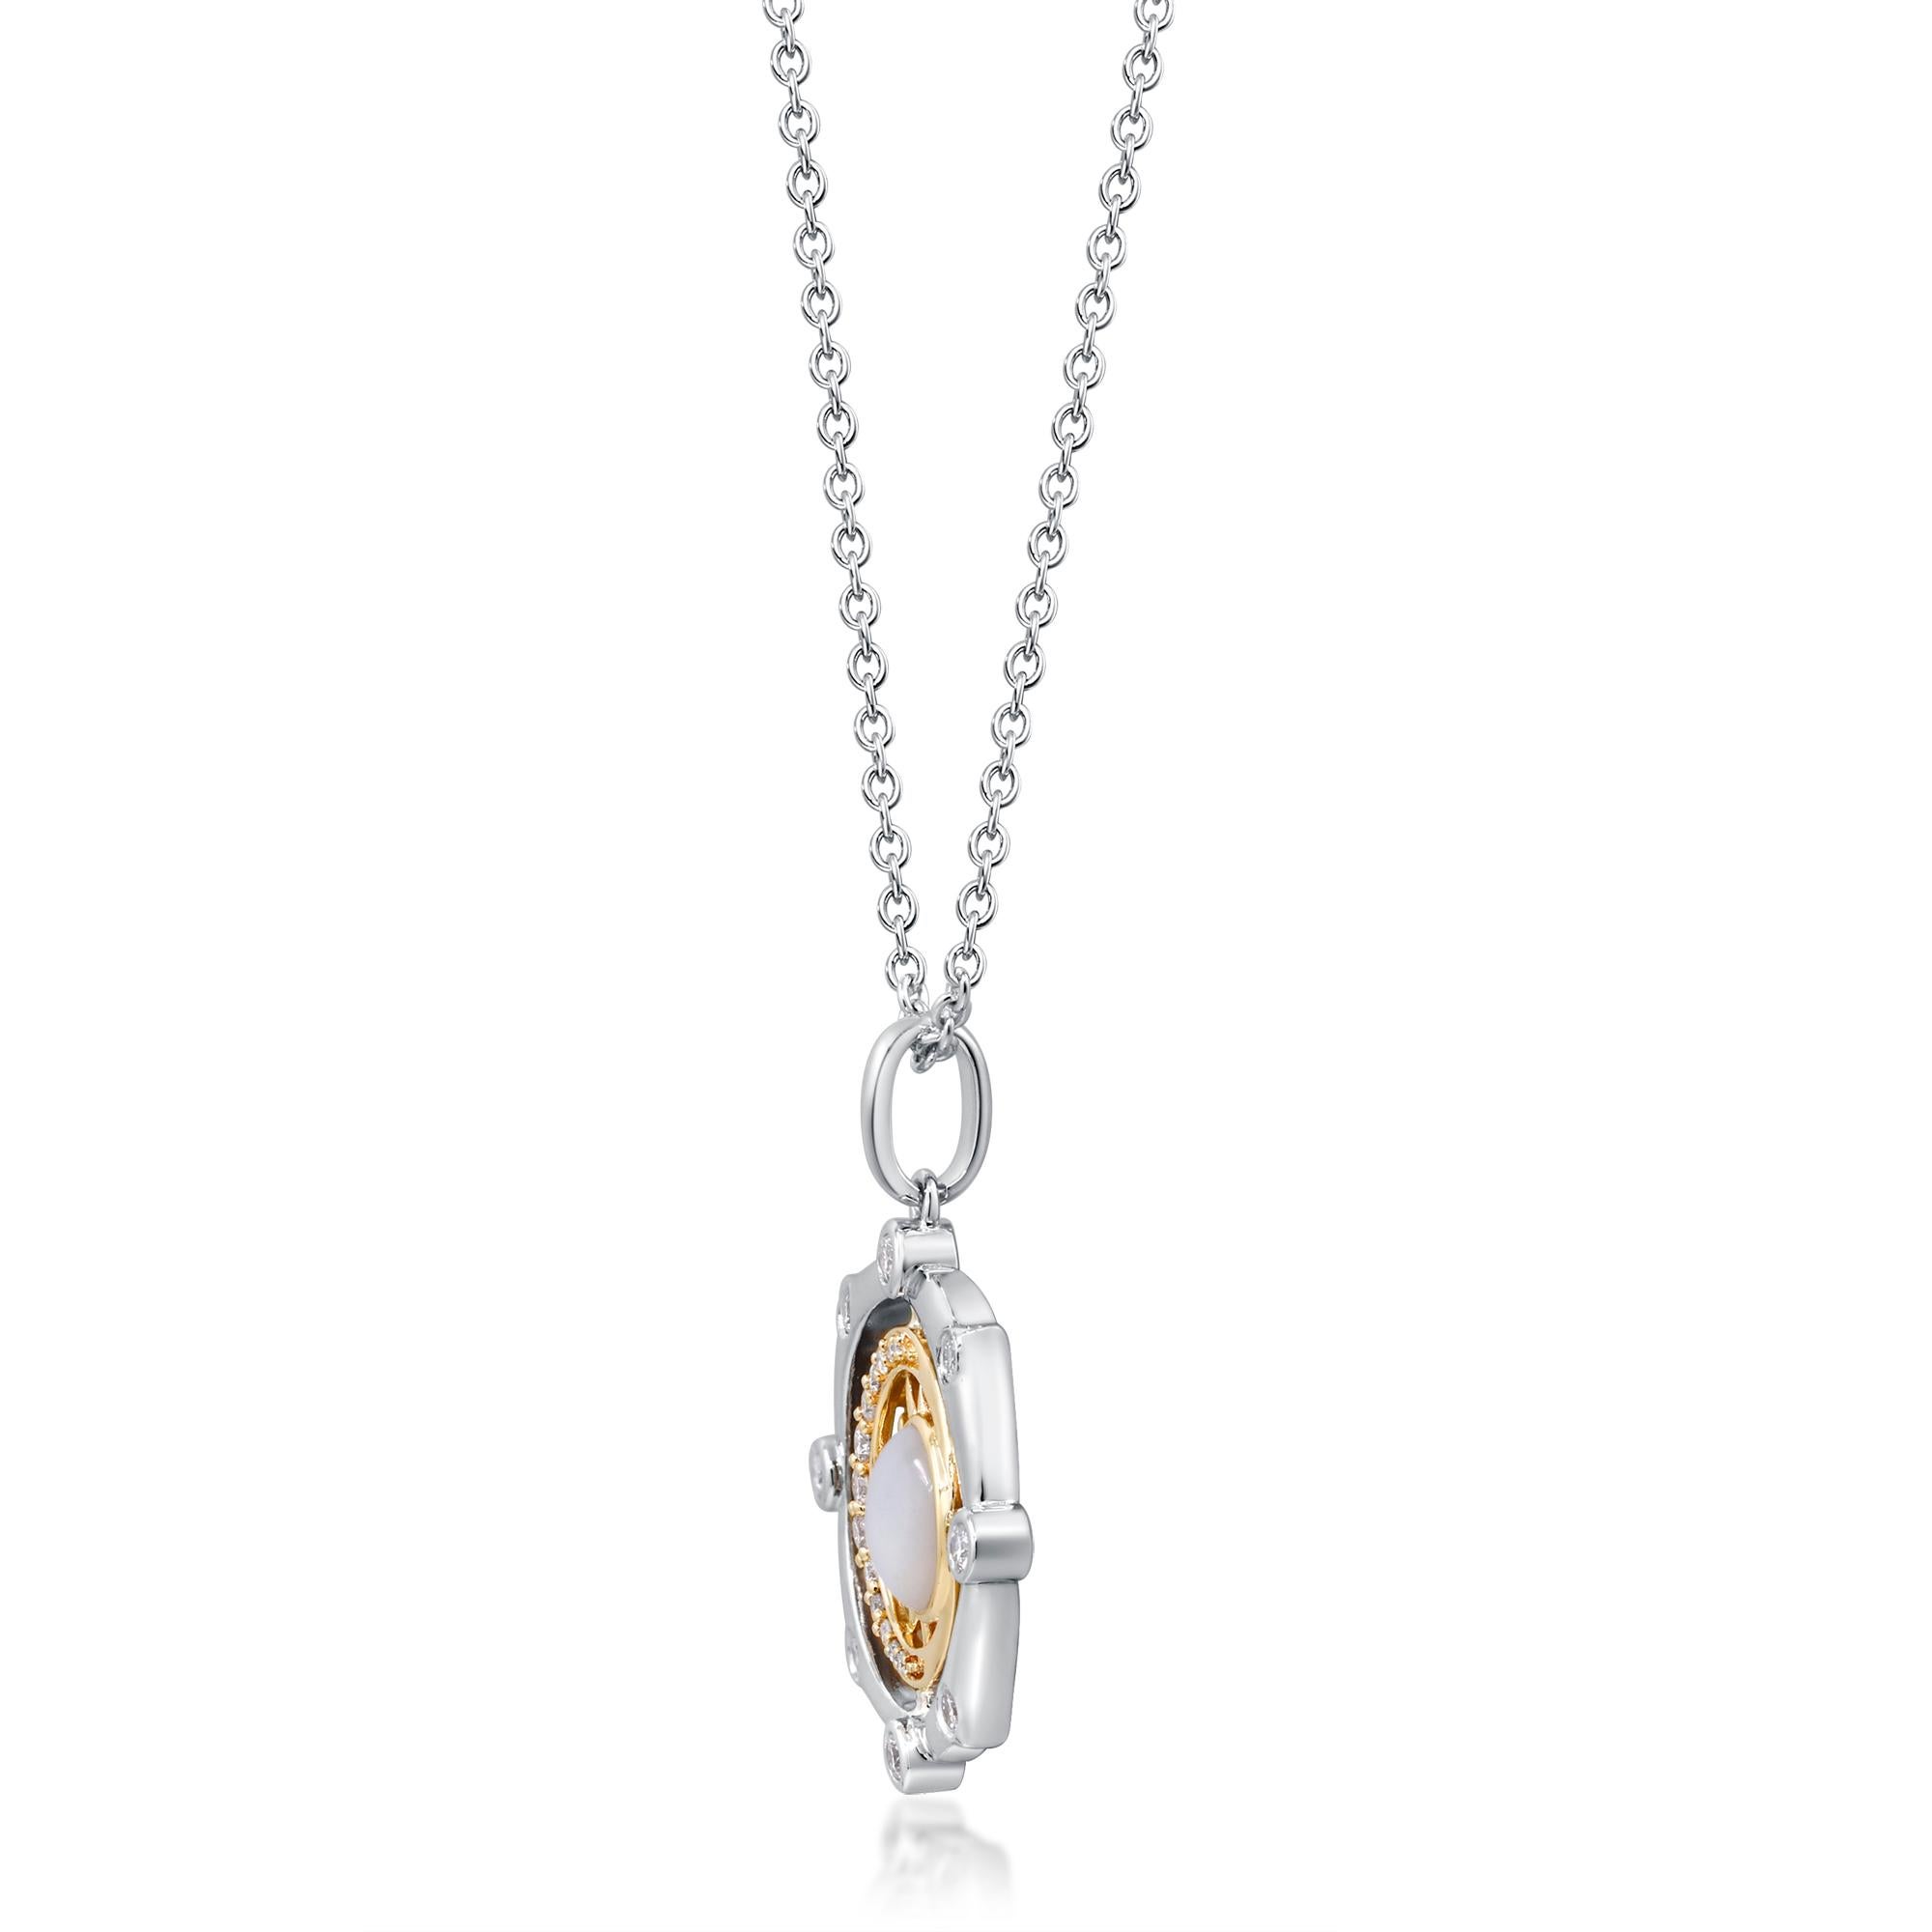 * The Little sun is part of a unique Smithsonian collection created by G&G and made of 14Kt Yellow Gold. Its surface is covered in a mother of pearl stone. 
* The Smithsonian Jewelry collection which is launched in 2022 in collaboration with Gin and